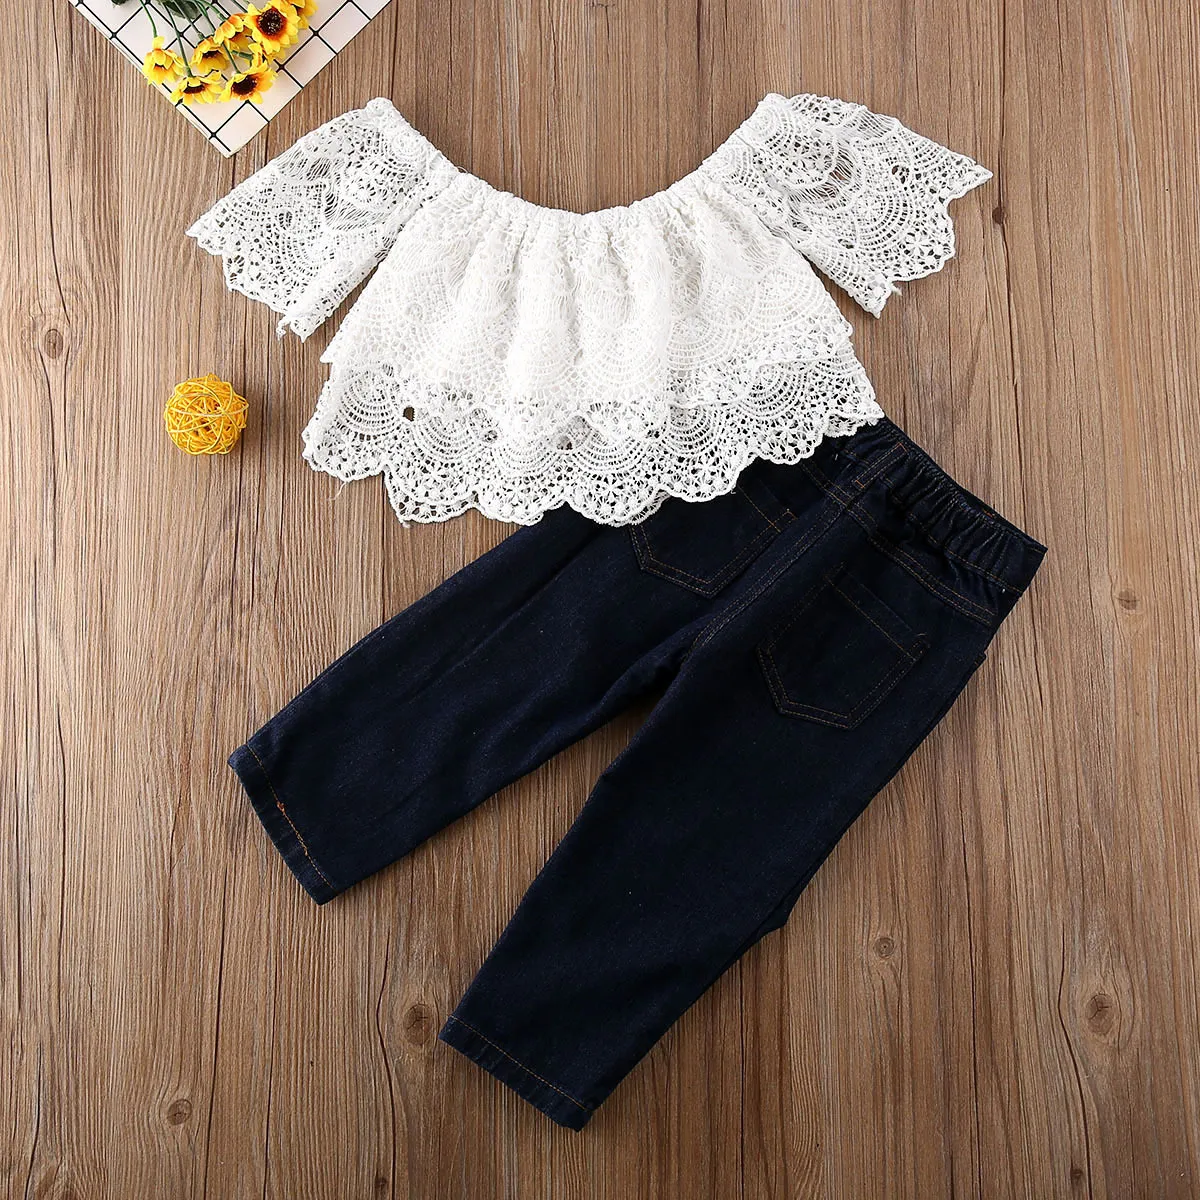 Toddler Kids Baby Girl Clothes Baby Summer Clothing Off Shoulder Lace Tops Ripped Fishnet Patchwork Jeans Pants Outfit Y200832745932